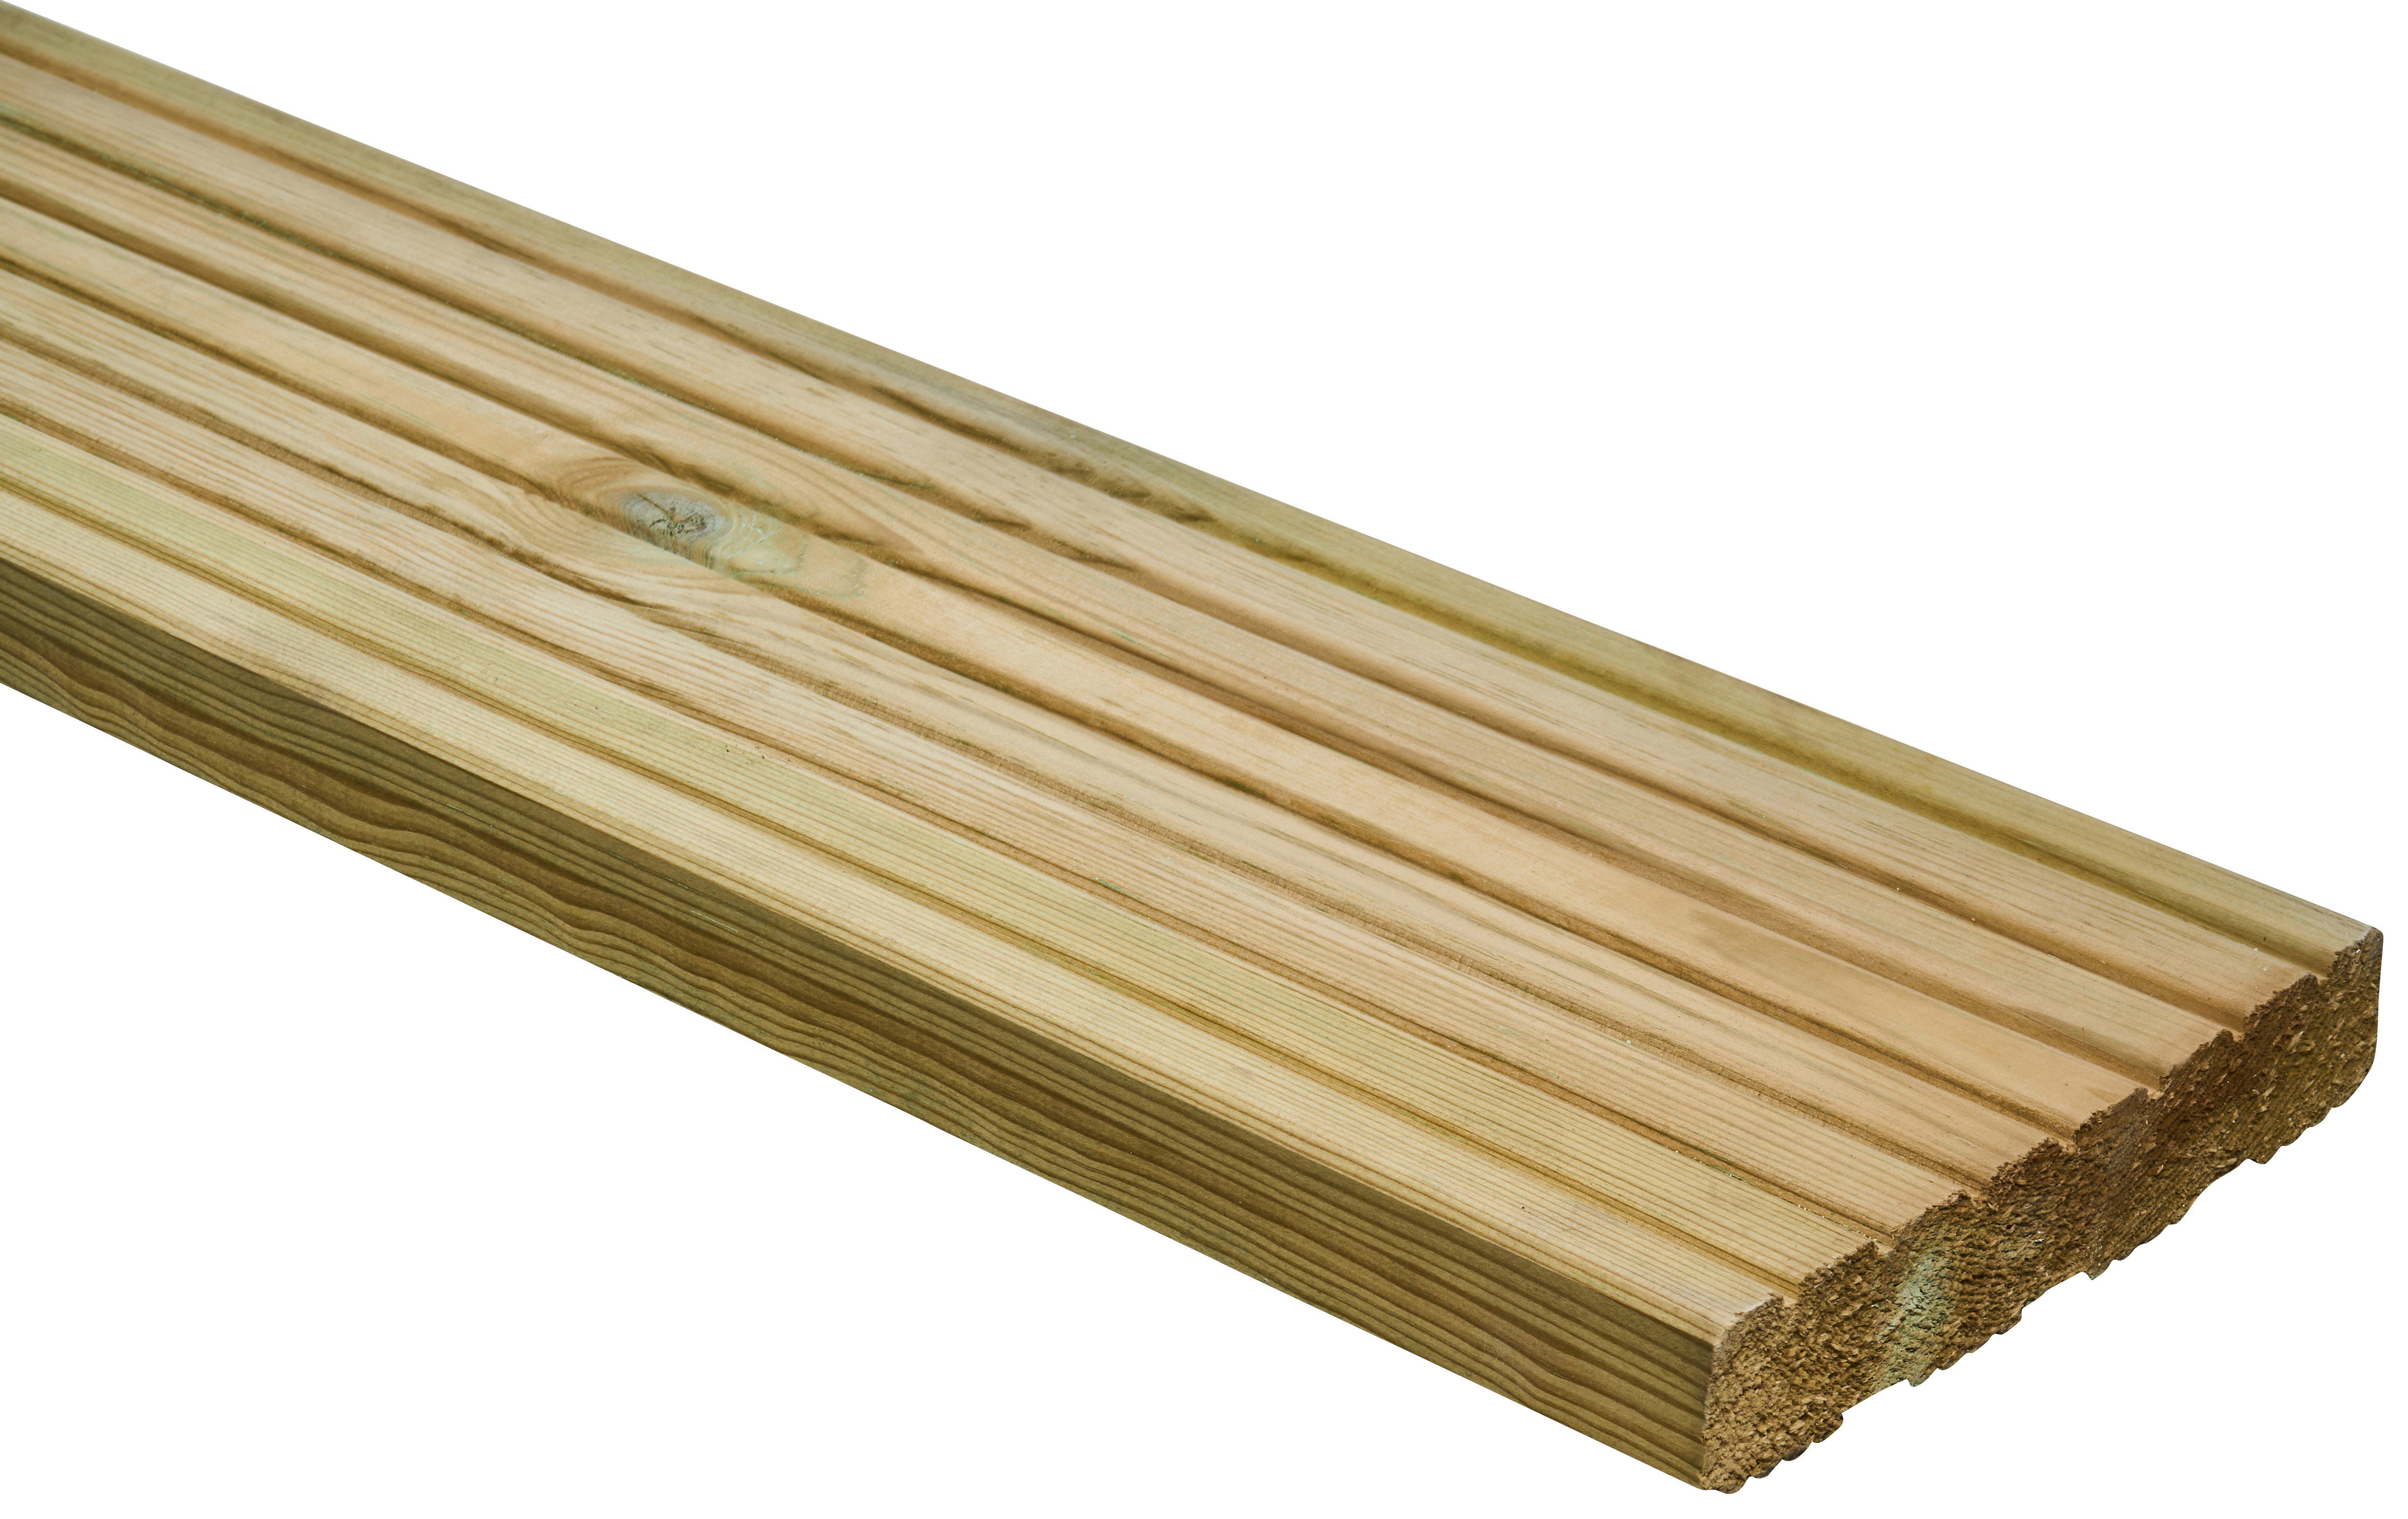 Image of Wickes Pro Timber Deck Board - 27 x 144 x 4800mm - Pack of 40